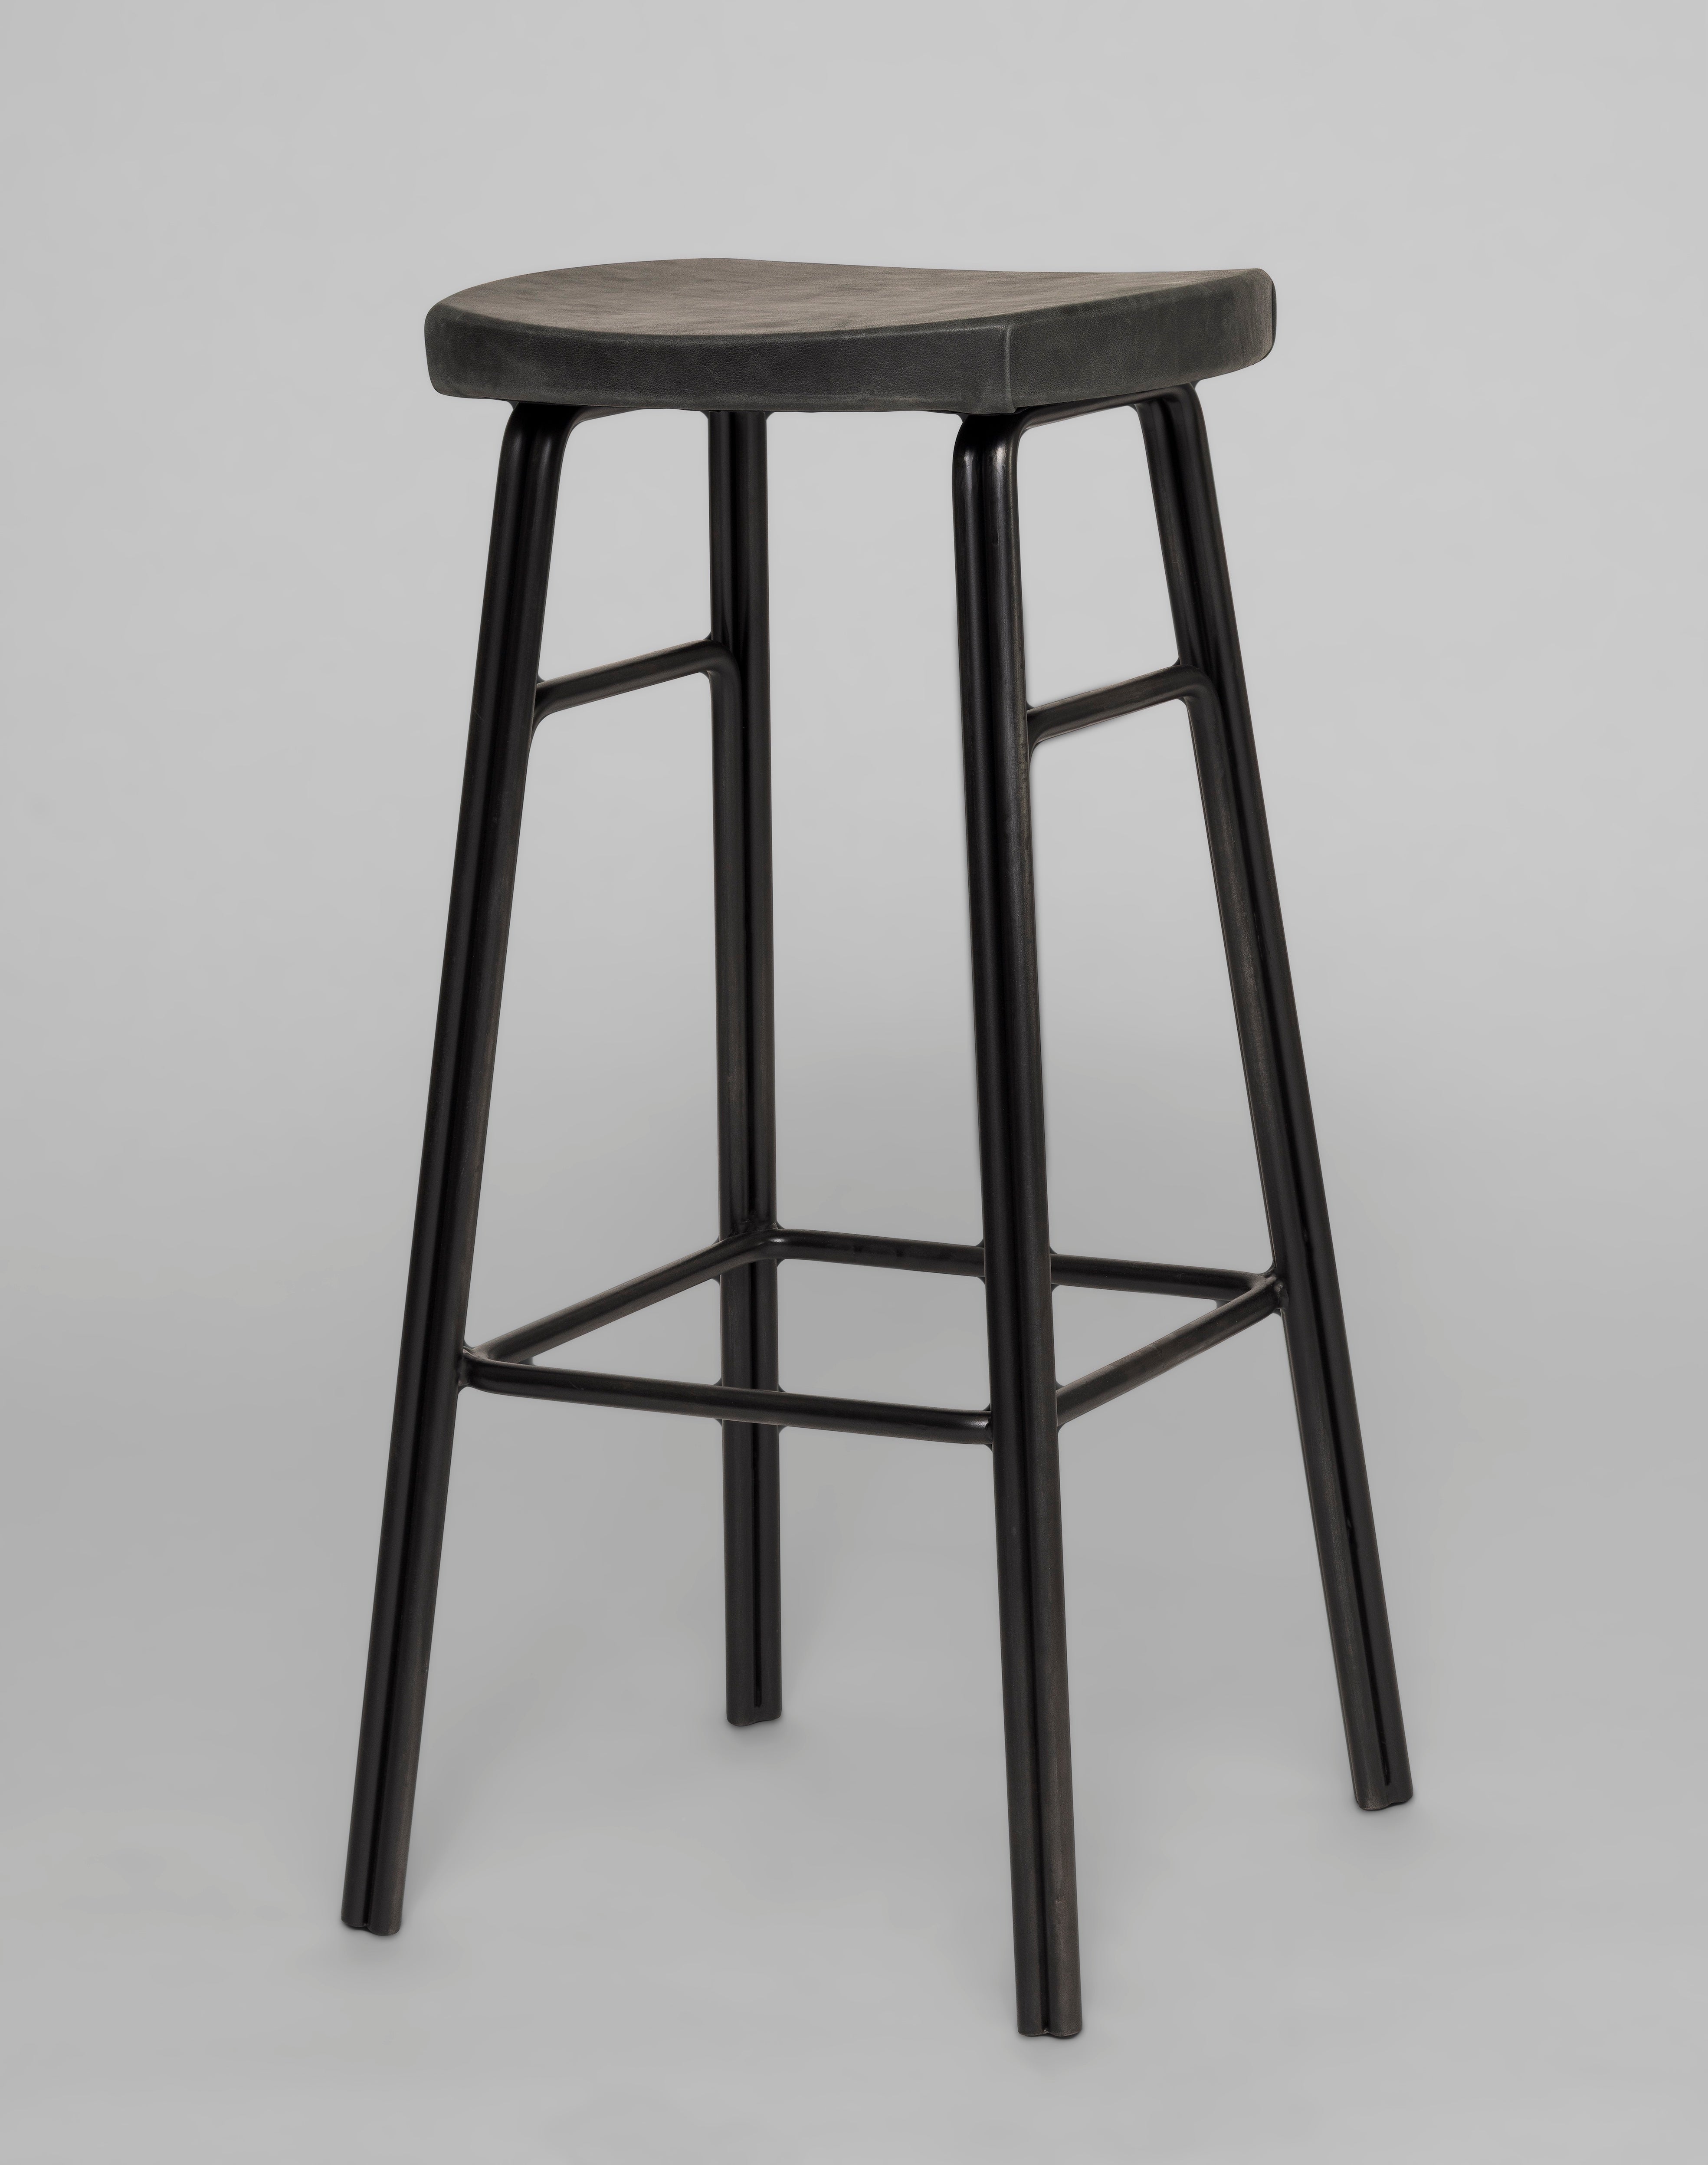 Daley Bar Stool Shown in Midnight metal finish with Distressed Paprika leather